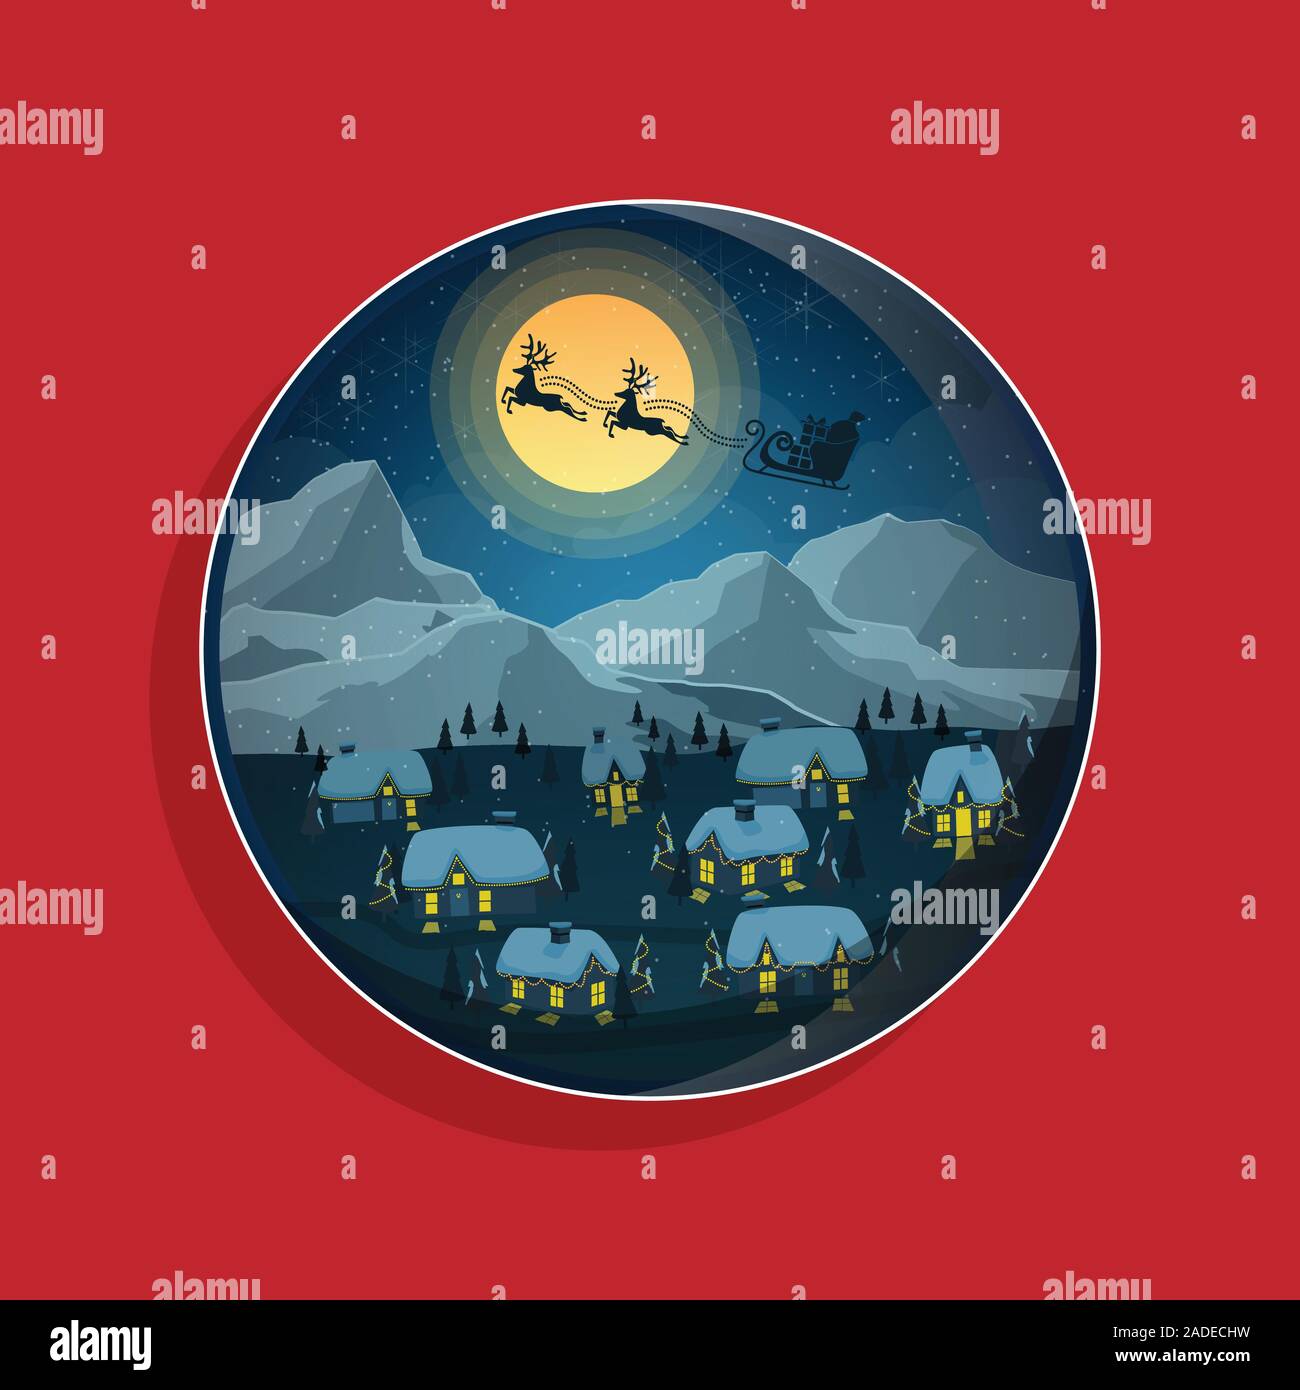 Christmas greeting banner in circle badge. reindeer with sleigh with gift box fly over winter landscape night. vector illustration Stock Vector